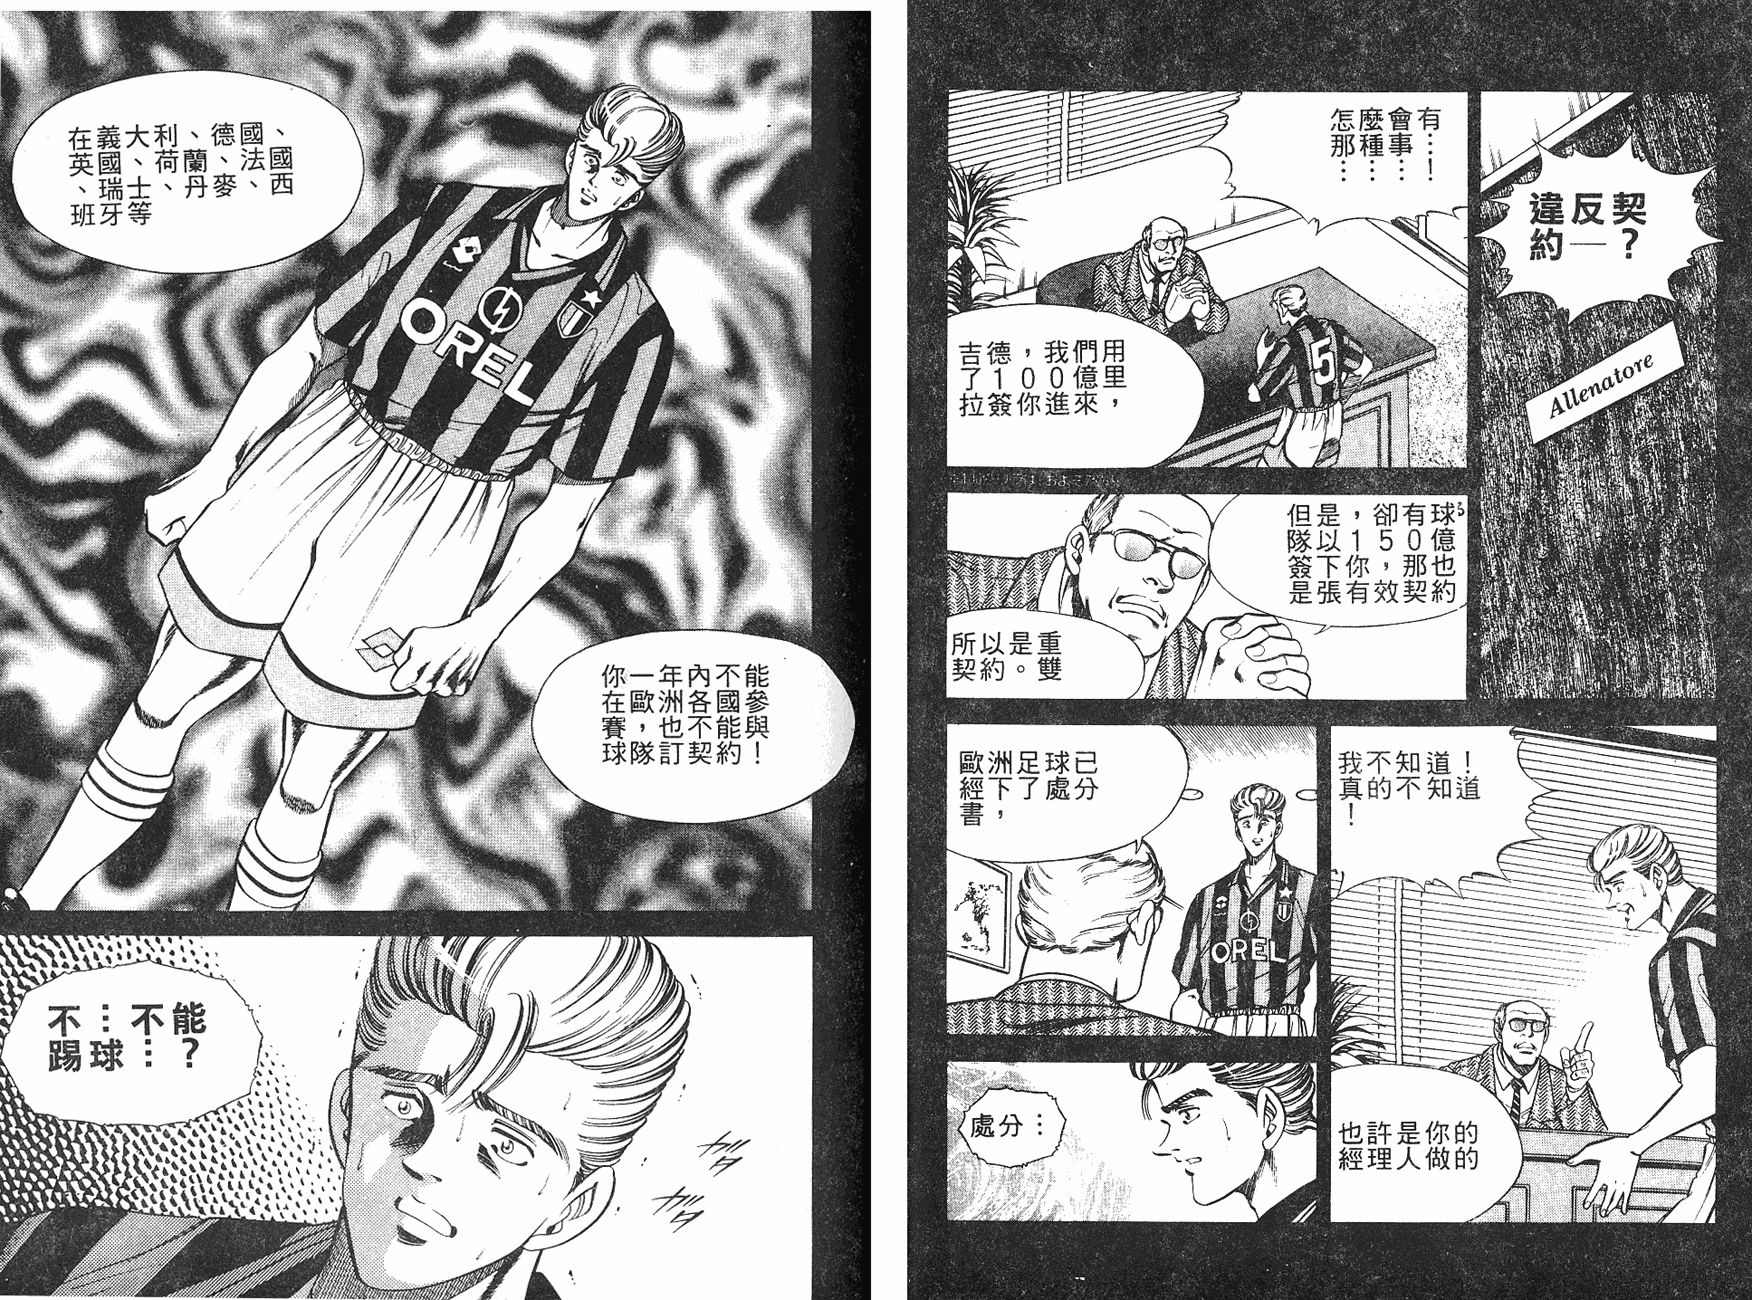 Two Top - 第02卷(1/3) - 1